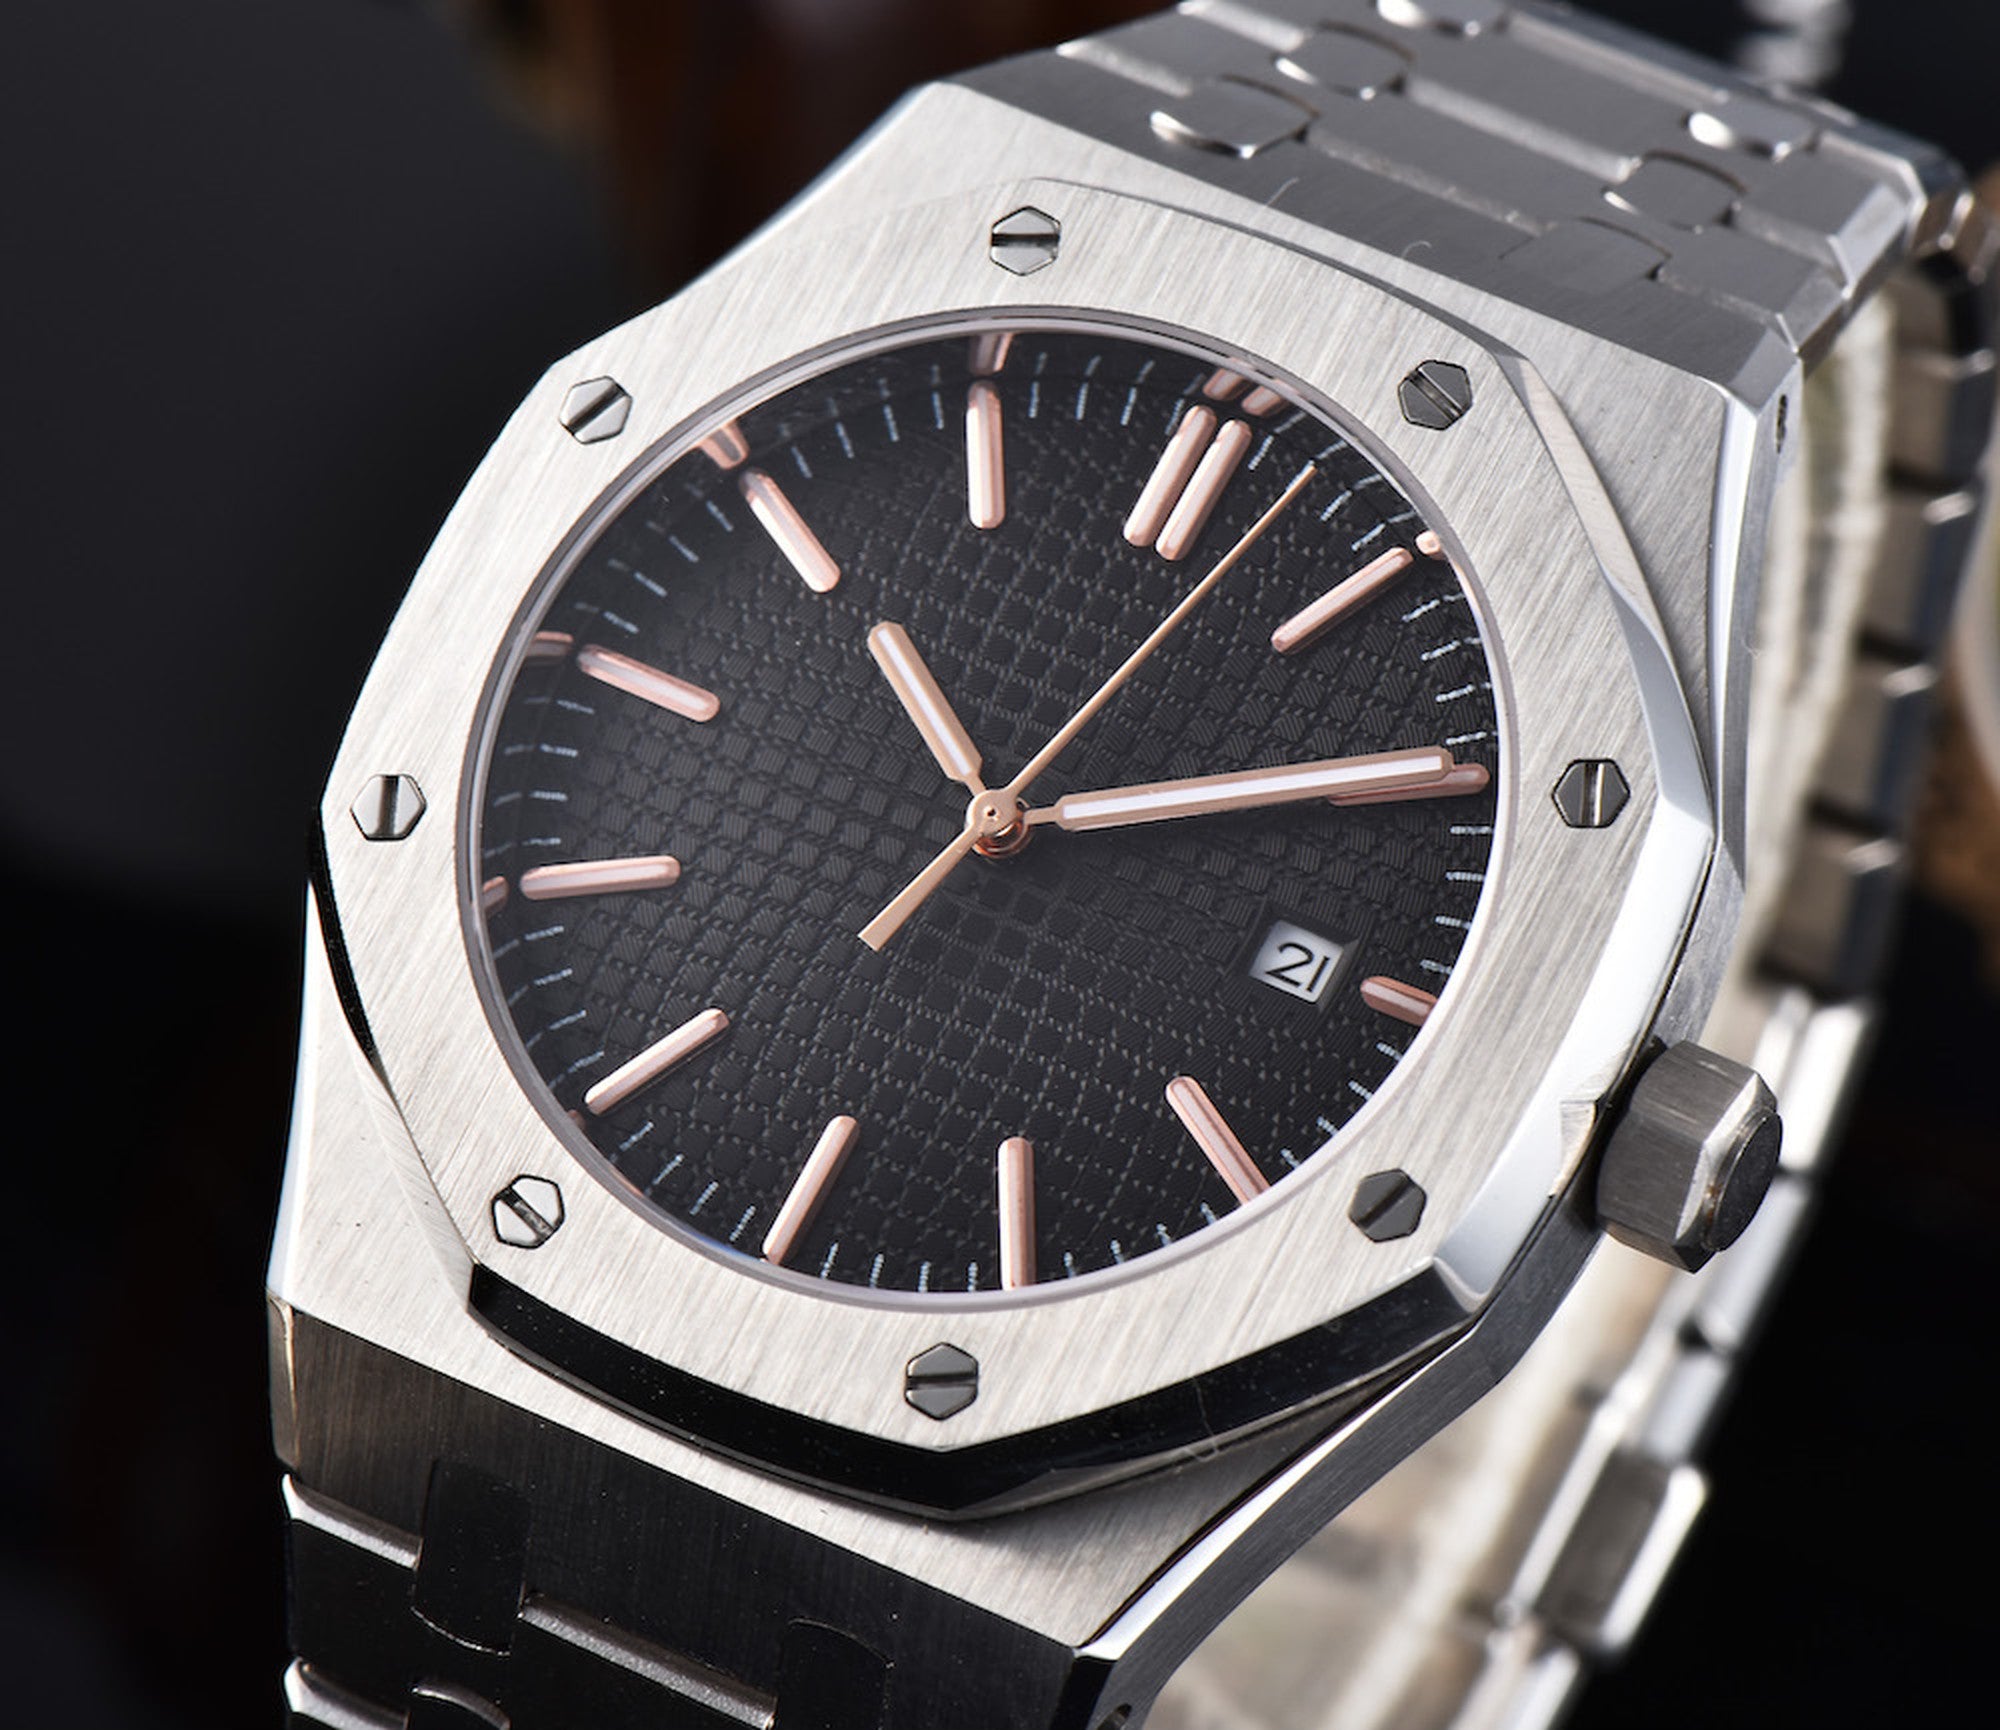 Mechanical Men's Automatic: Stainless Steel Watch Black / Rose Gold / Suit, Popular Brand / Fashion AP76